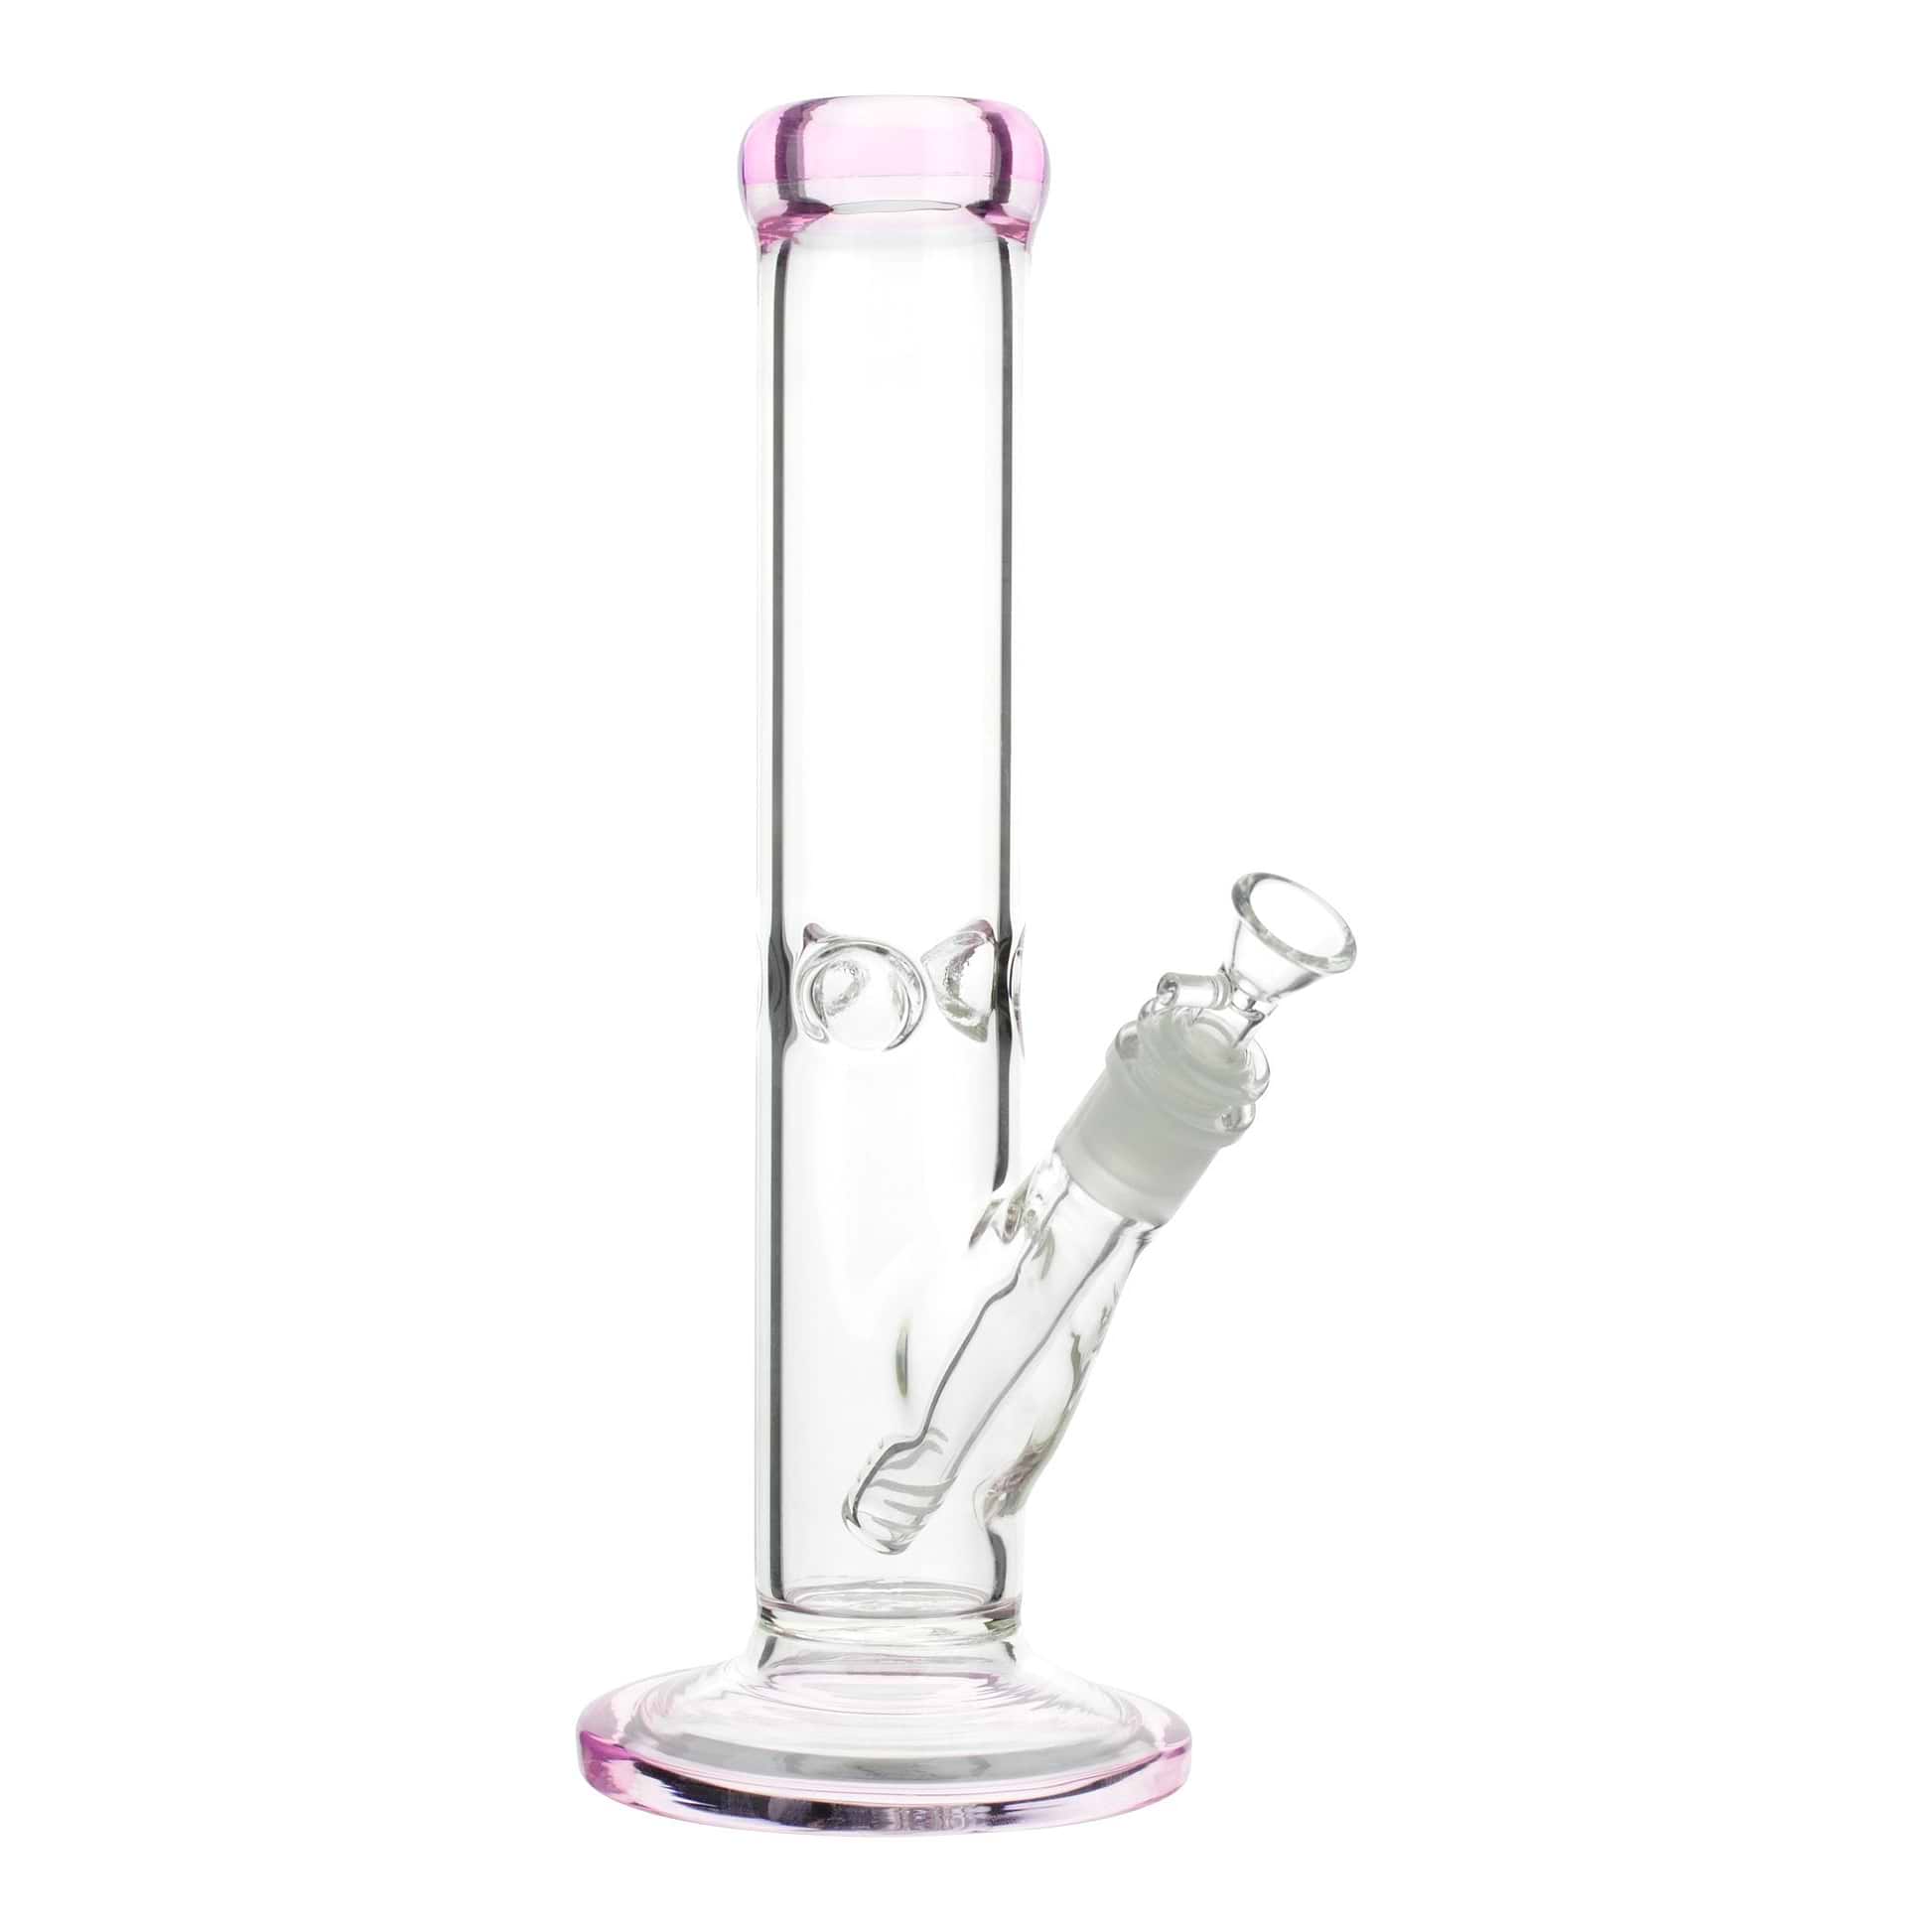 12-inch shooter bong smoking device straight body flat base with pink tinged glass ice-catcher percolated downstem